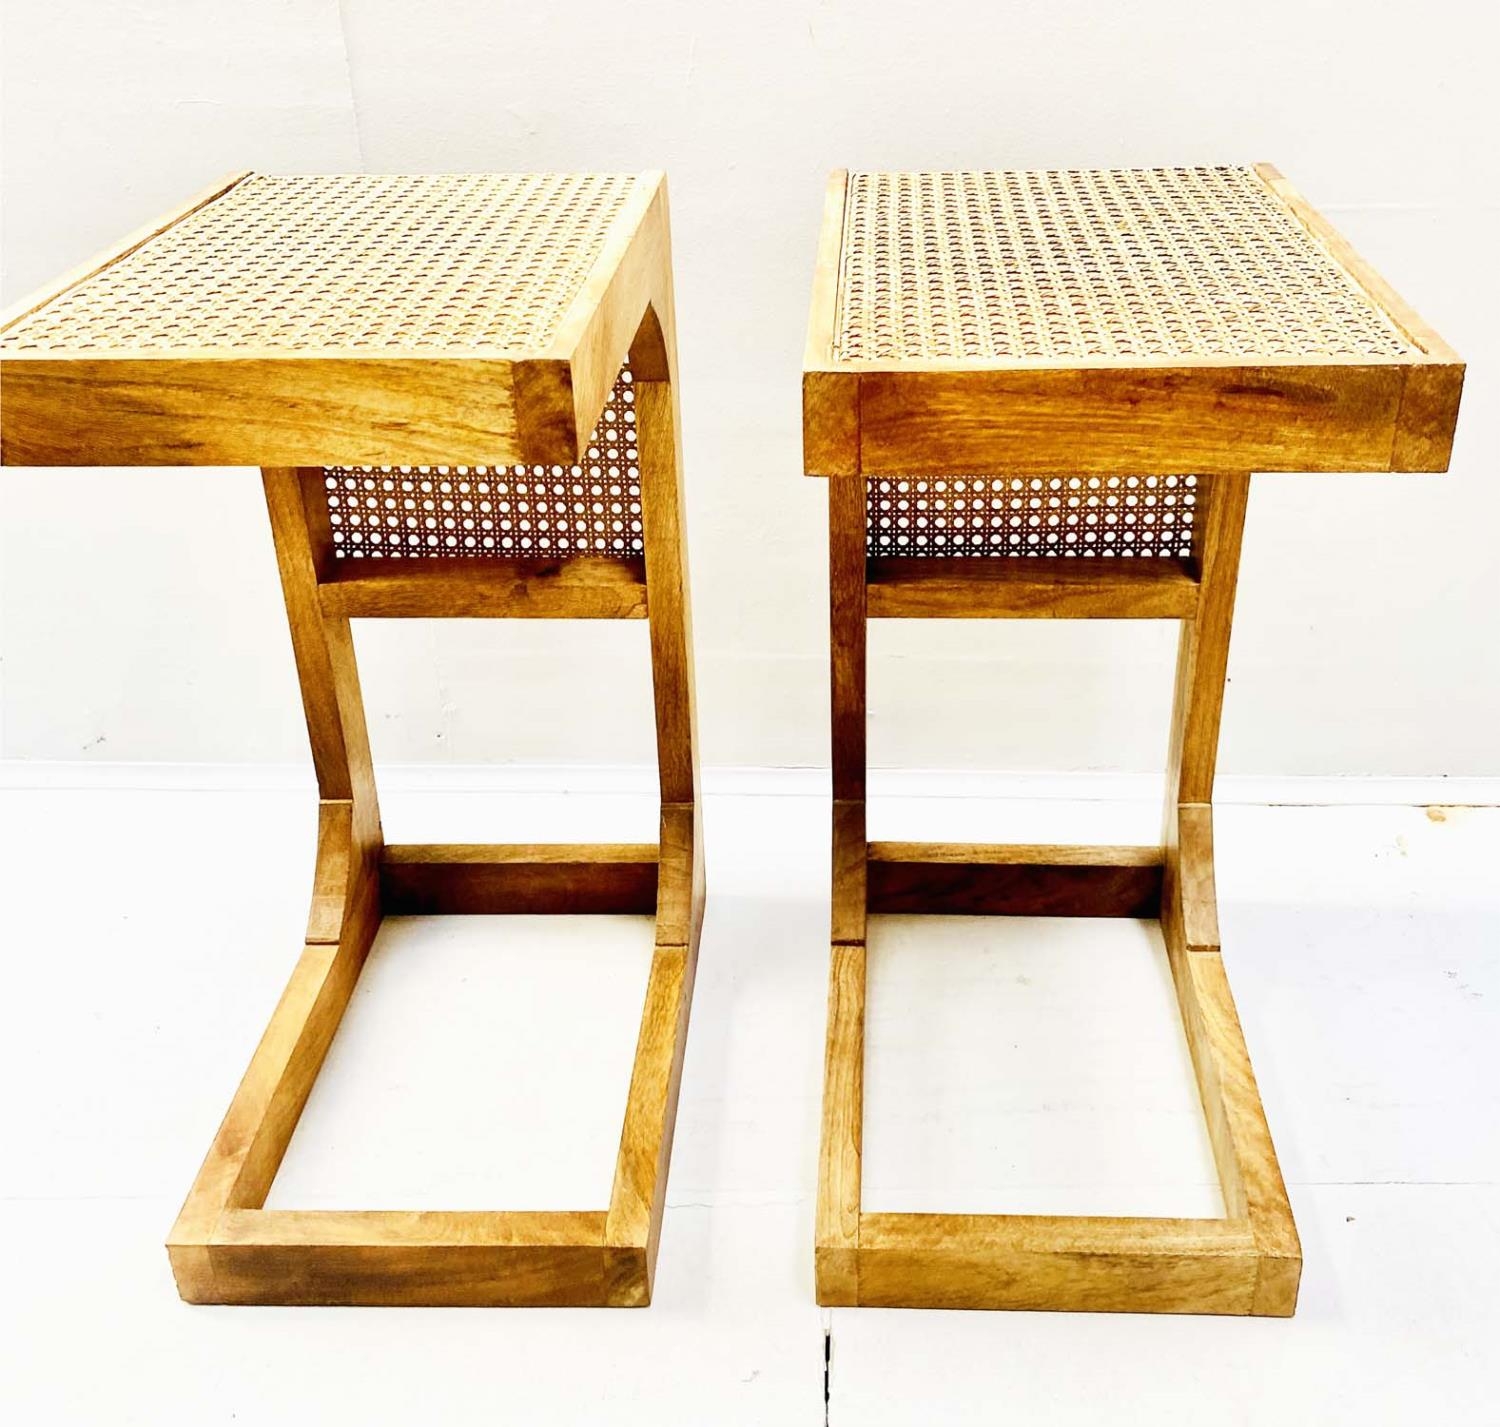 SIDE TABLES, a pair, 1970's Danish style, in wood and rattan, 60cm H x 30cm x 40cm. (2) - Image 2 of 5